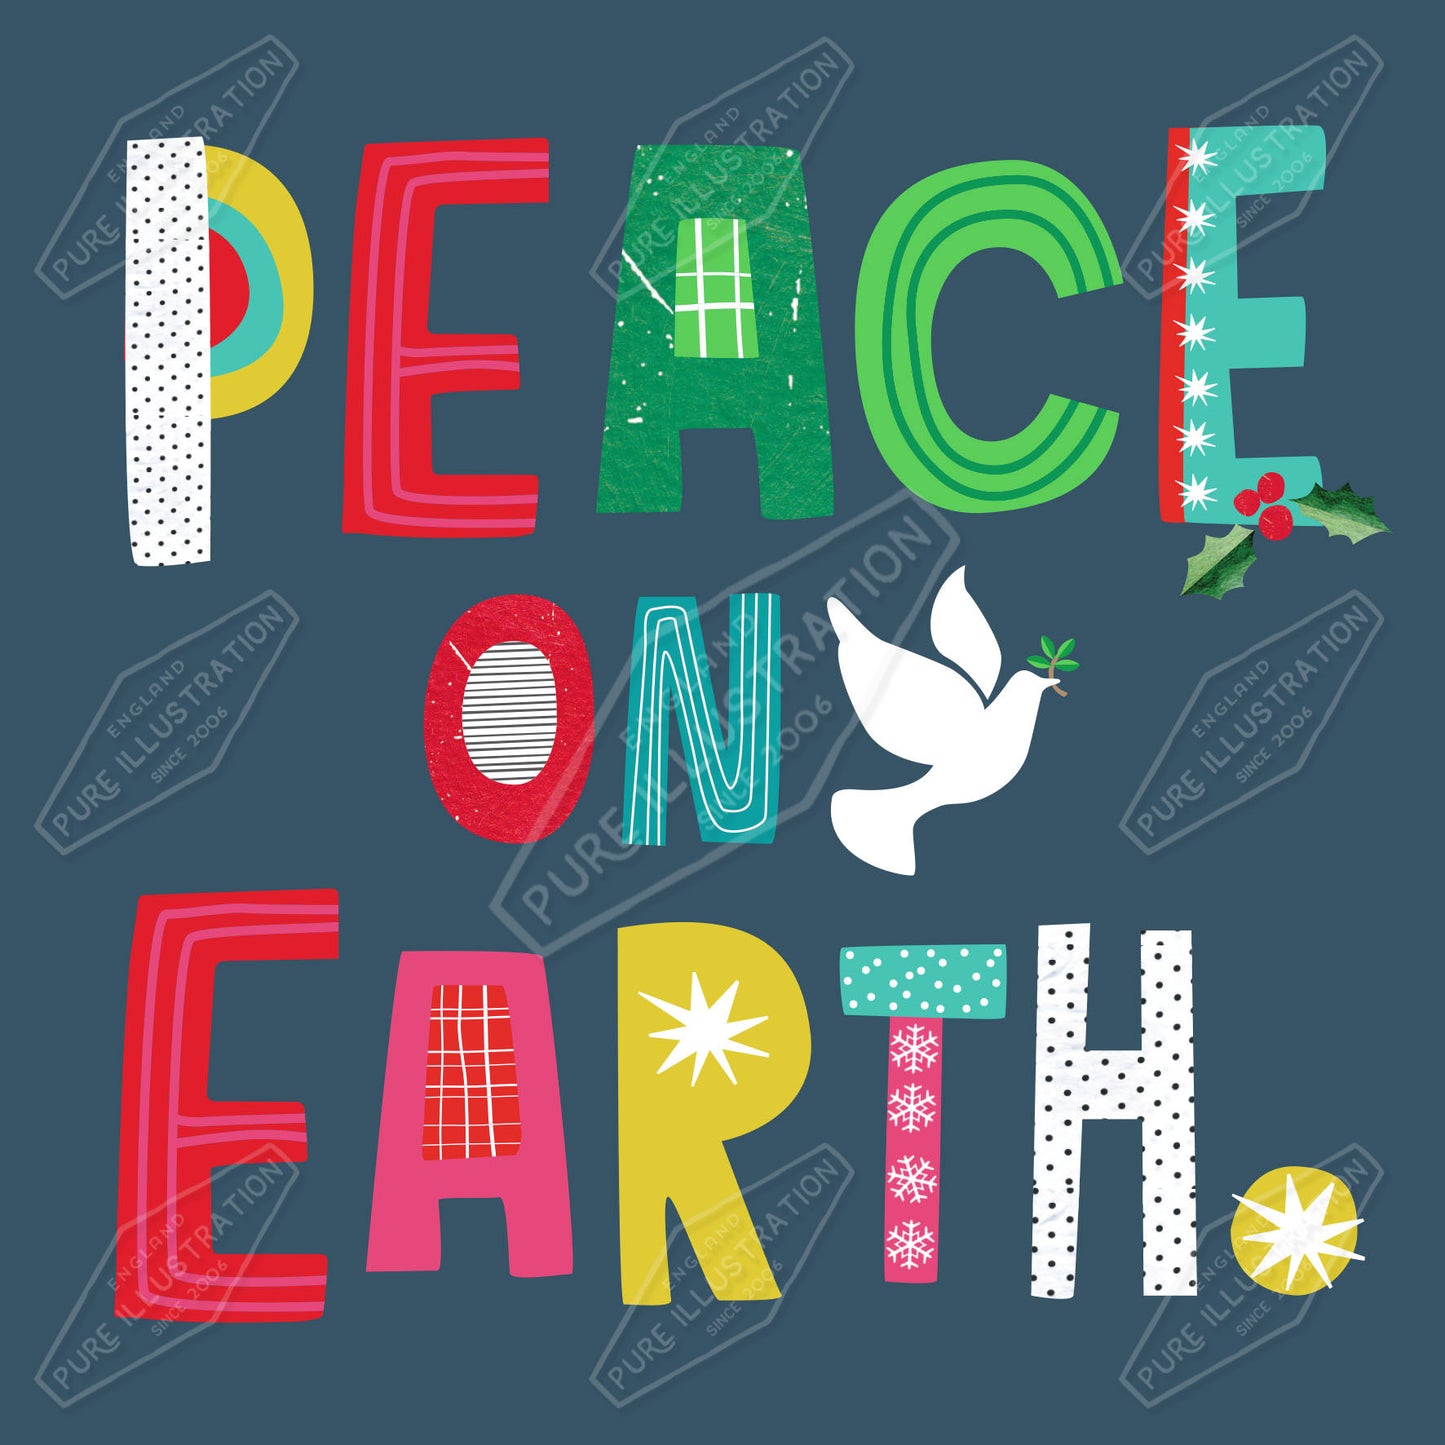 00035039IMC - Peace on Earth Christmas Design by Isla McDonald for Pure Art Licensing Agency International Product & Packaging Surface Design 